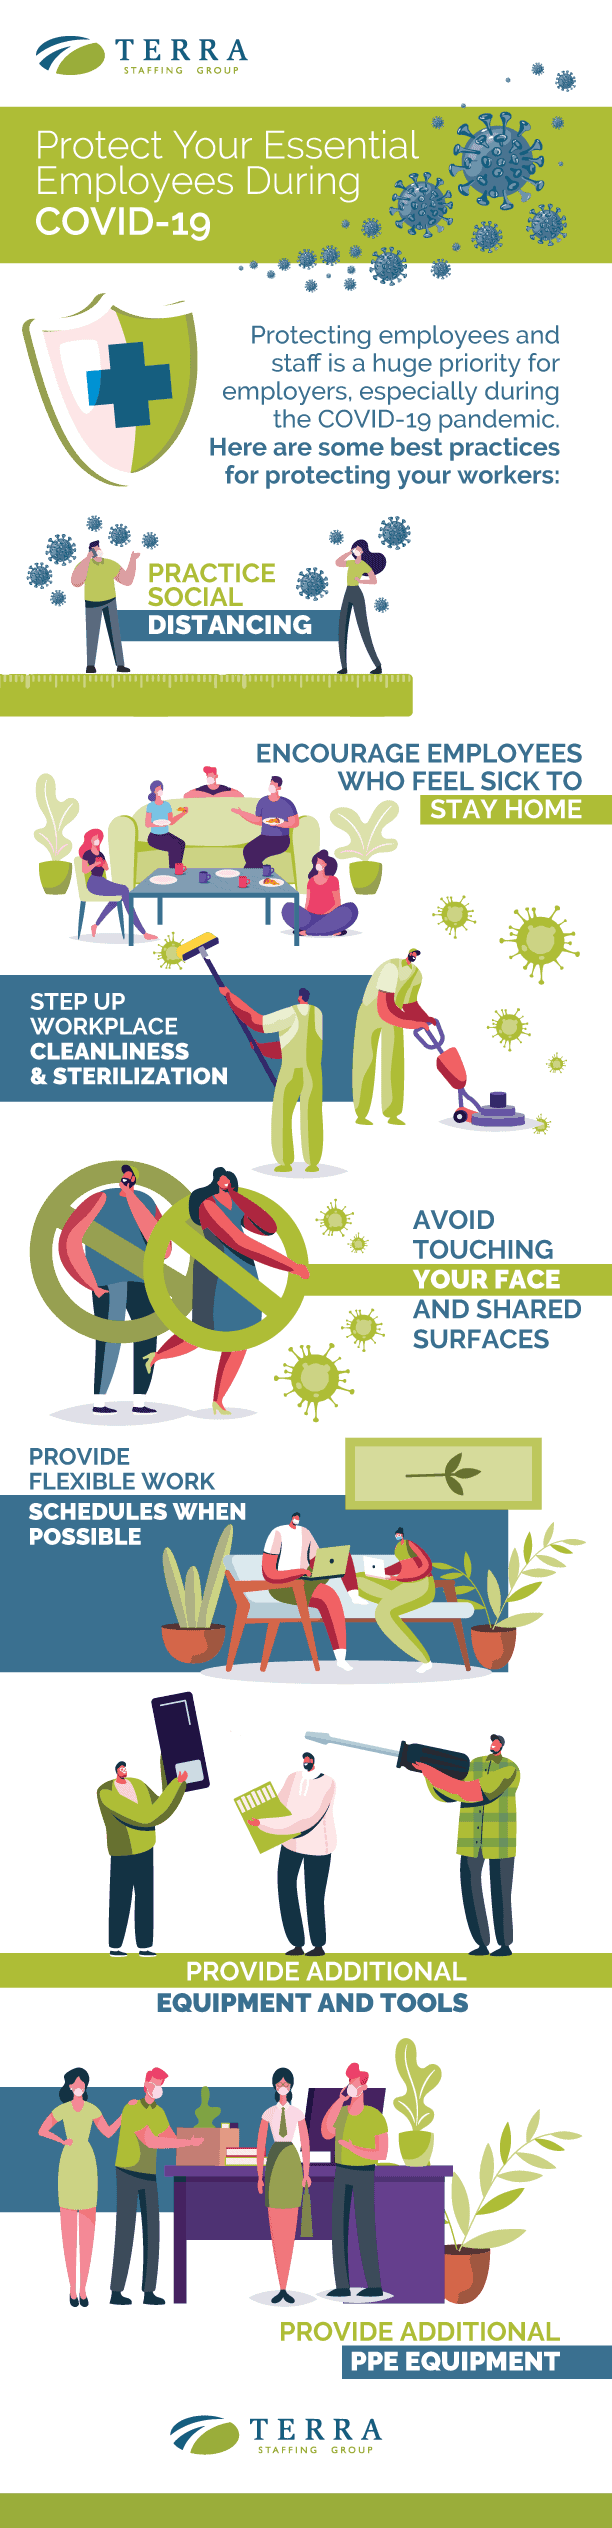 protecting employees during health outbreaks infographic